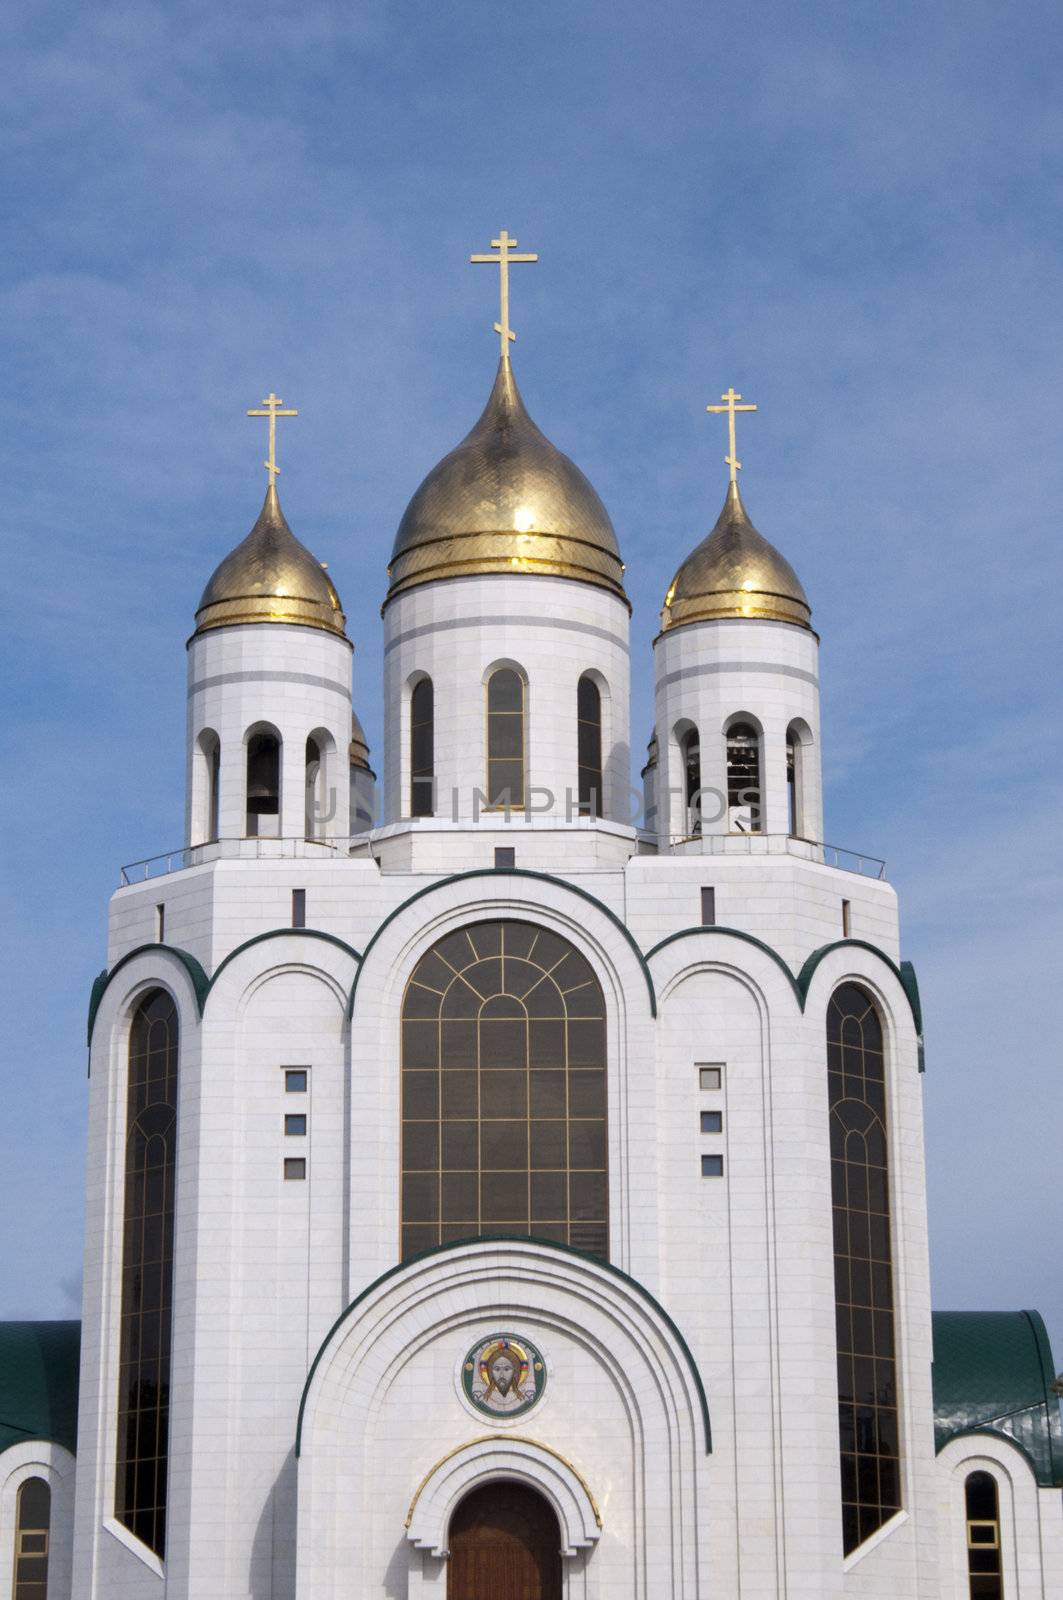 High resolution image. Russian cathedral with gold cupola, bell-tower and icons over entrances.